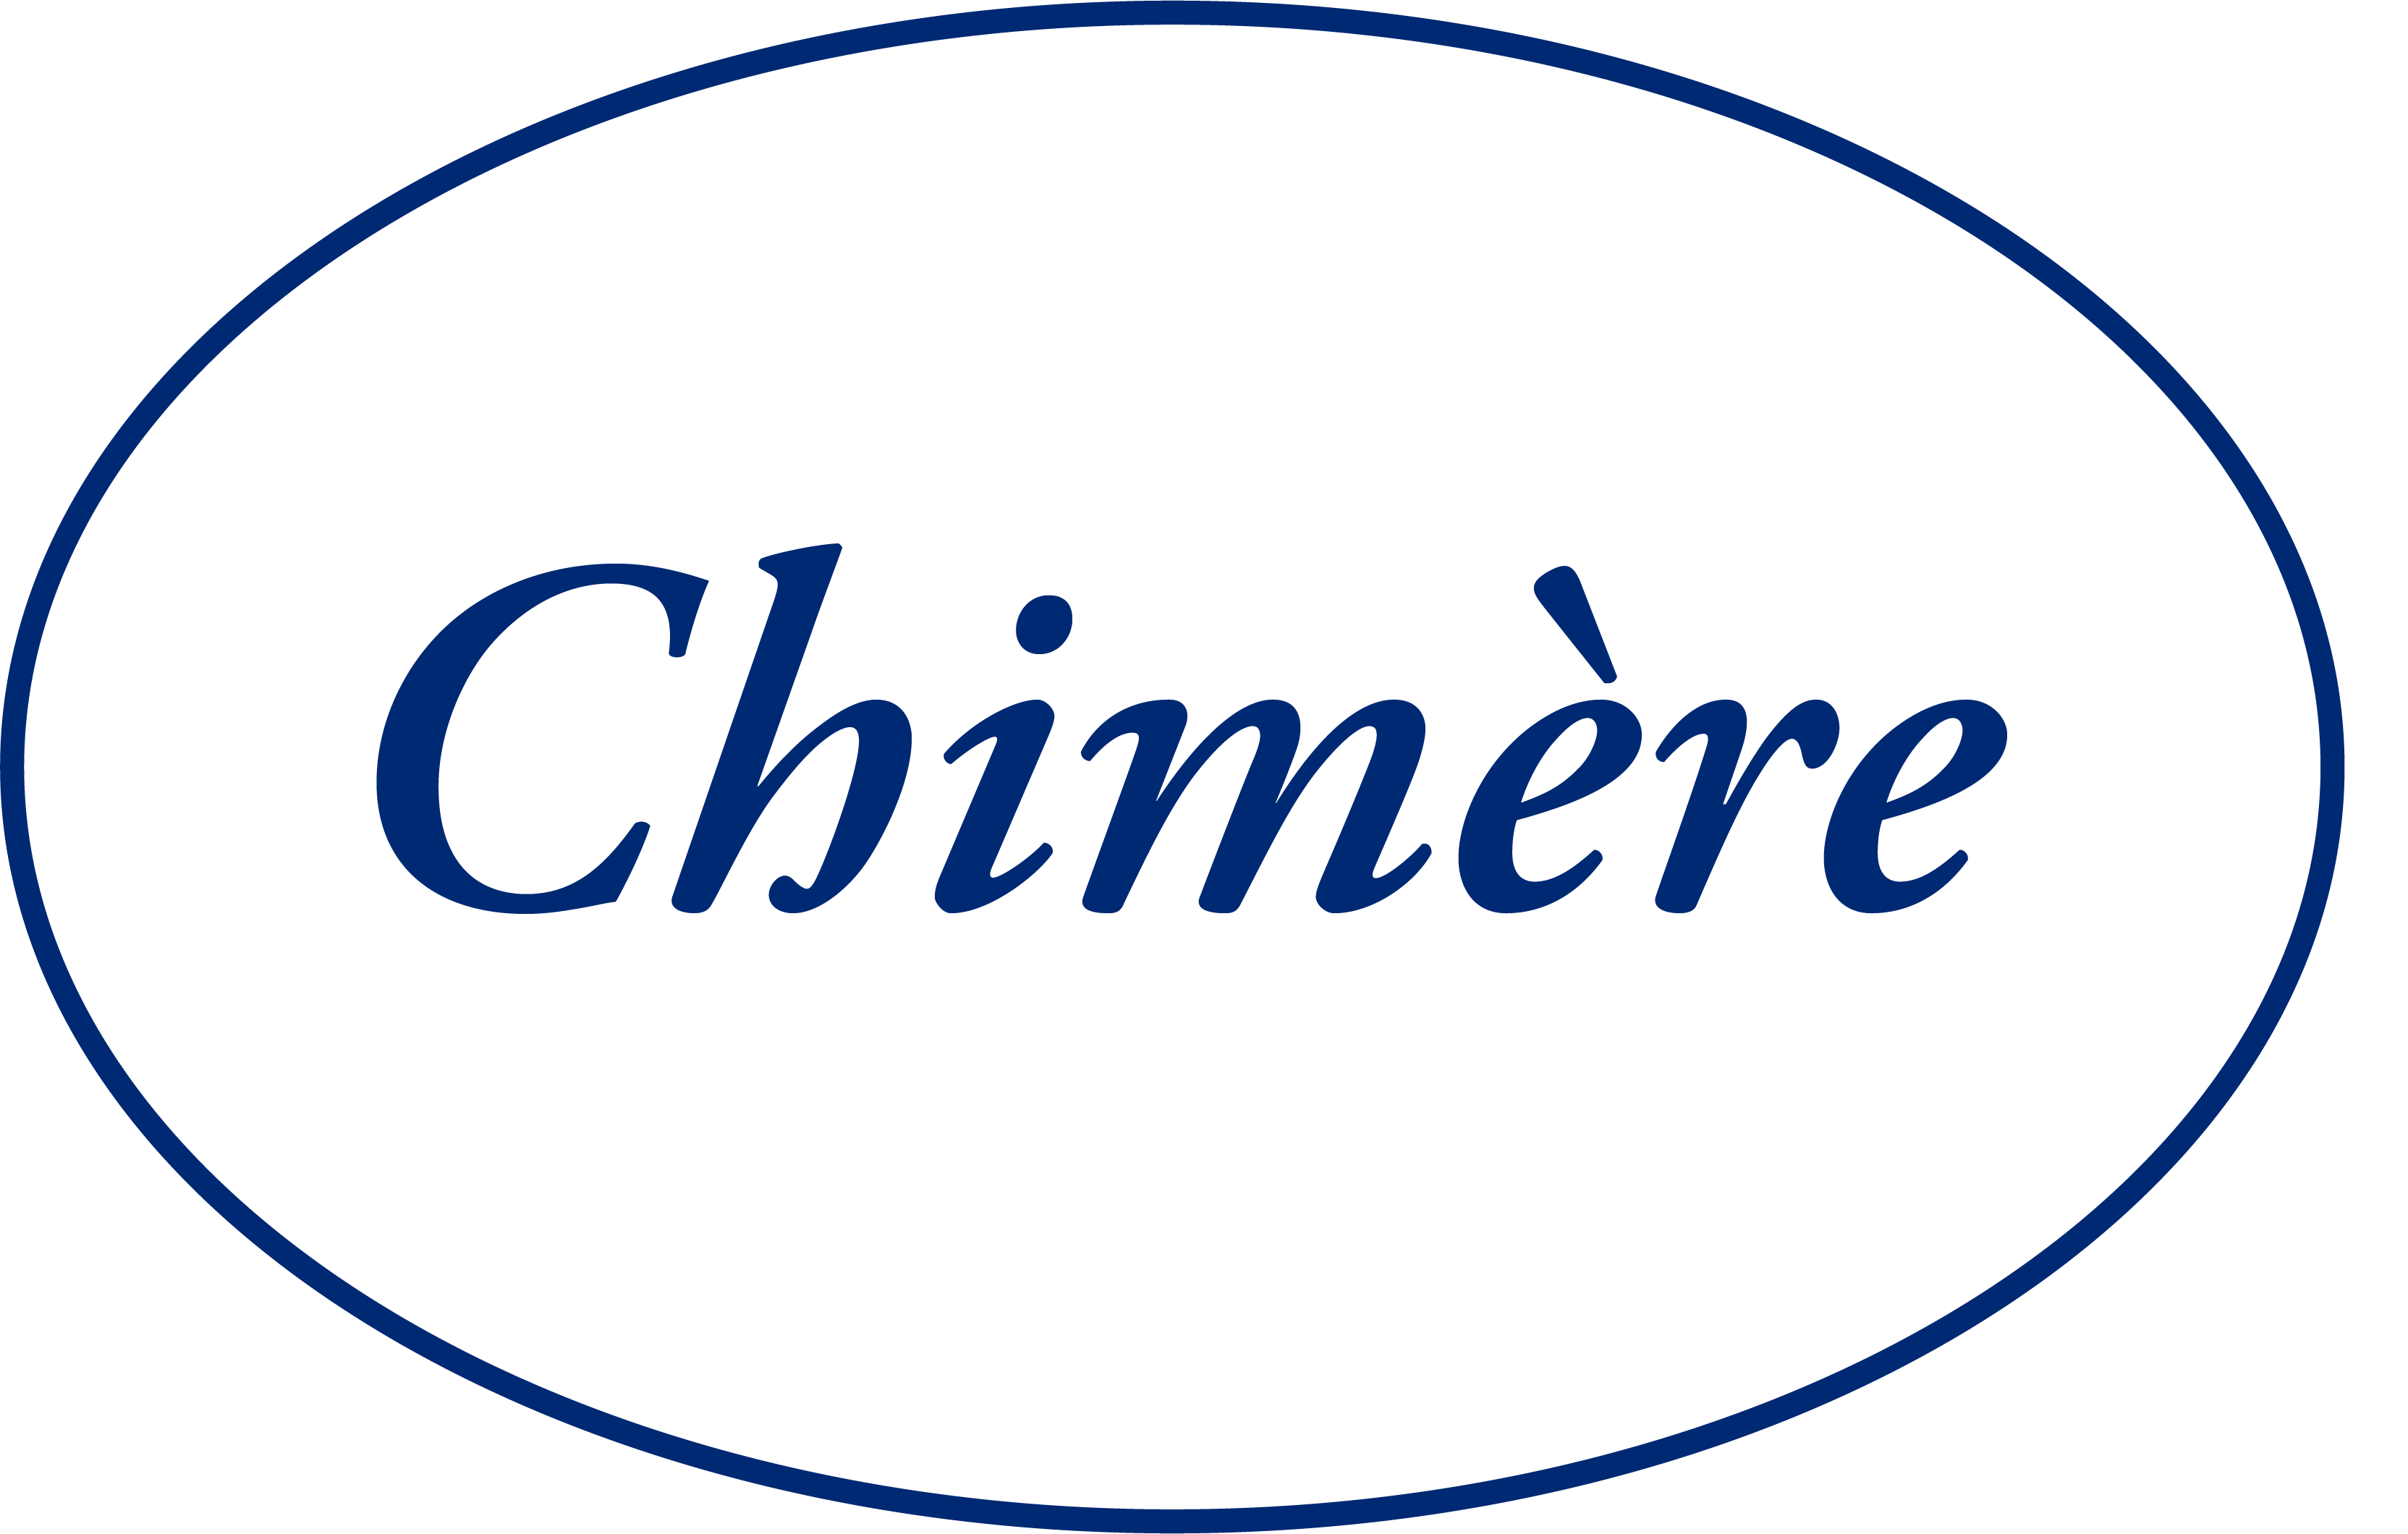 Chimere